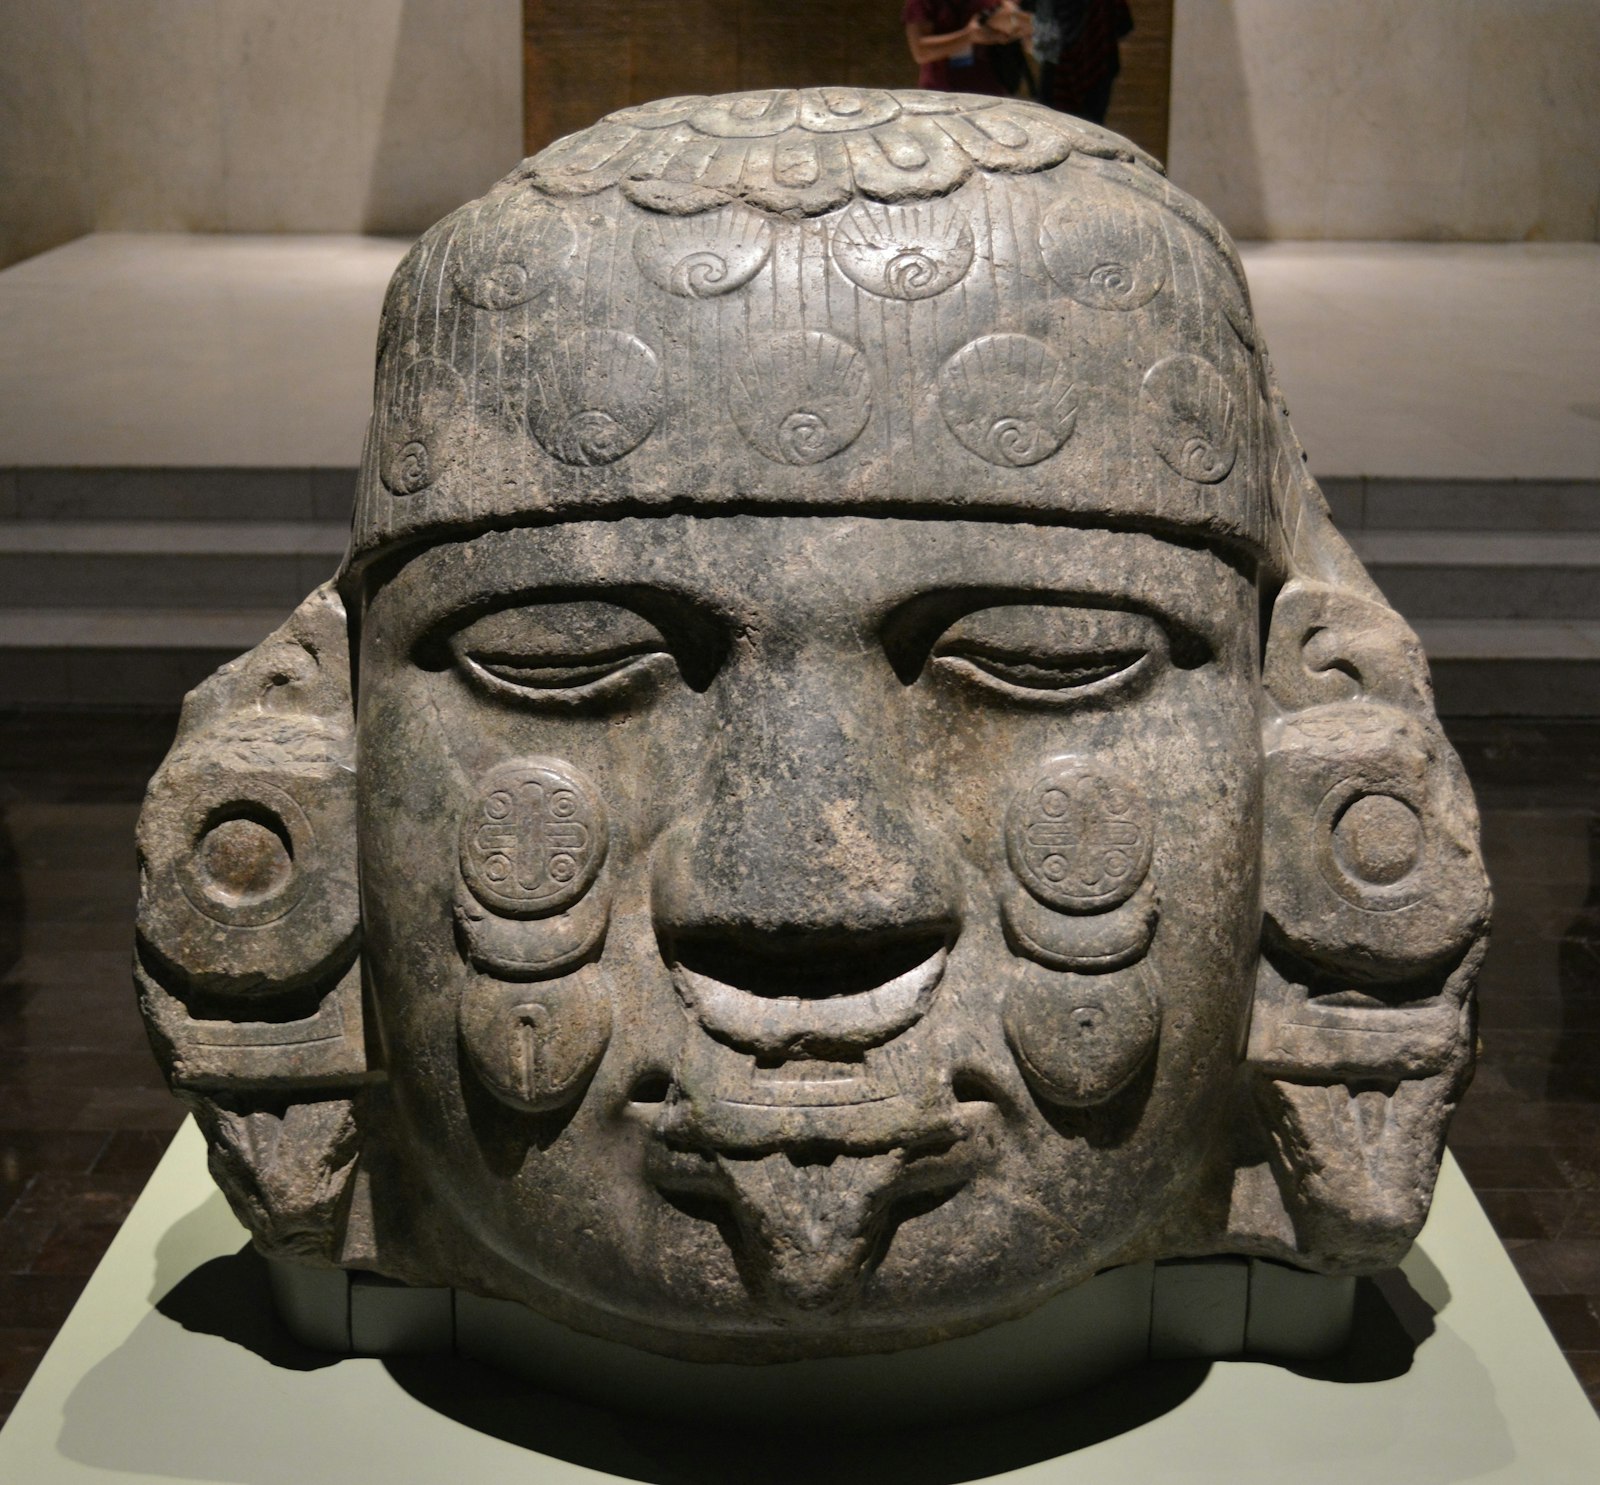 Coyolxauhqui in the National Museum of Anthropology in Mexico City